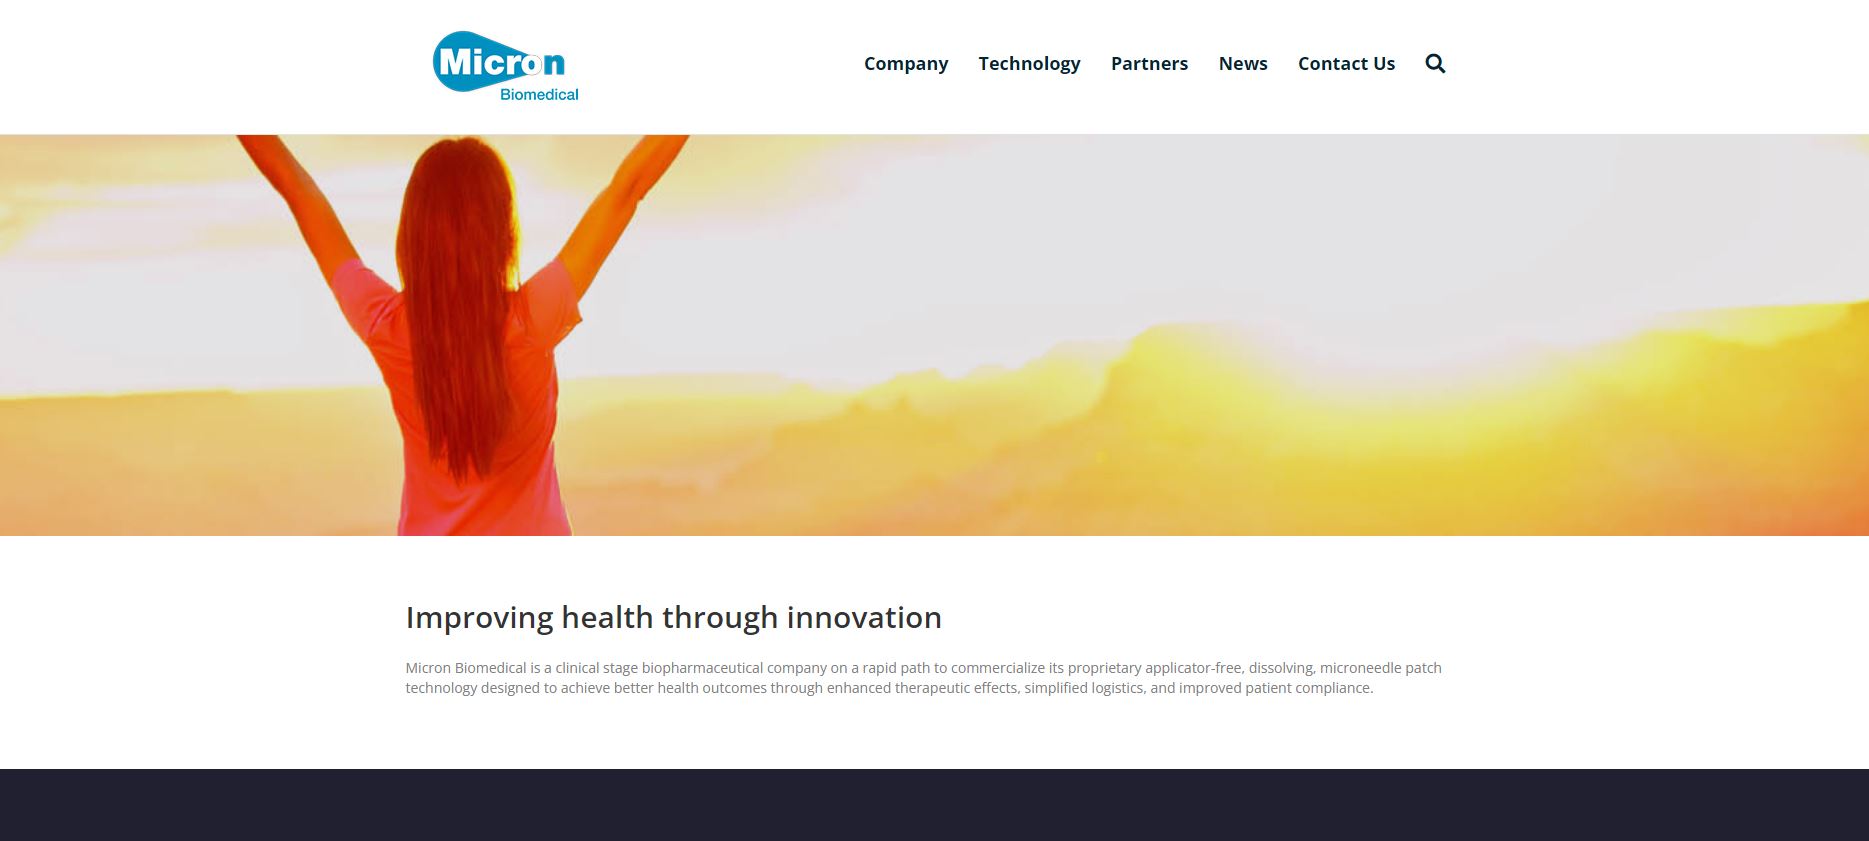 Micron Biomedical, Inc. a biopharmaceutical company recently raised an impressive $17 million in Series A funding